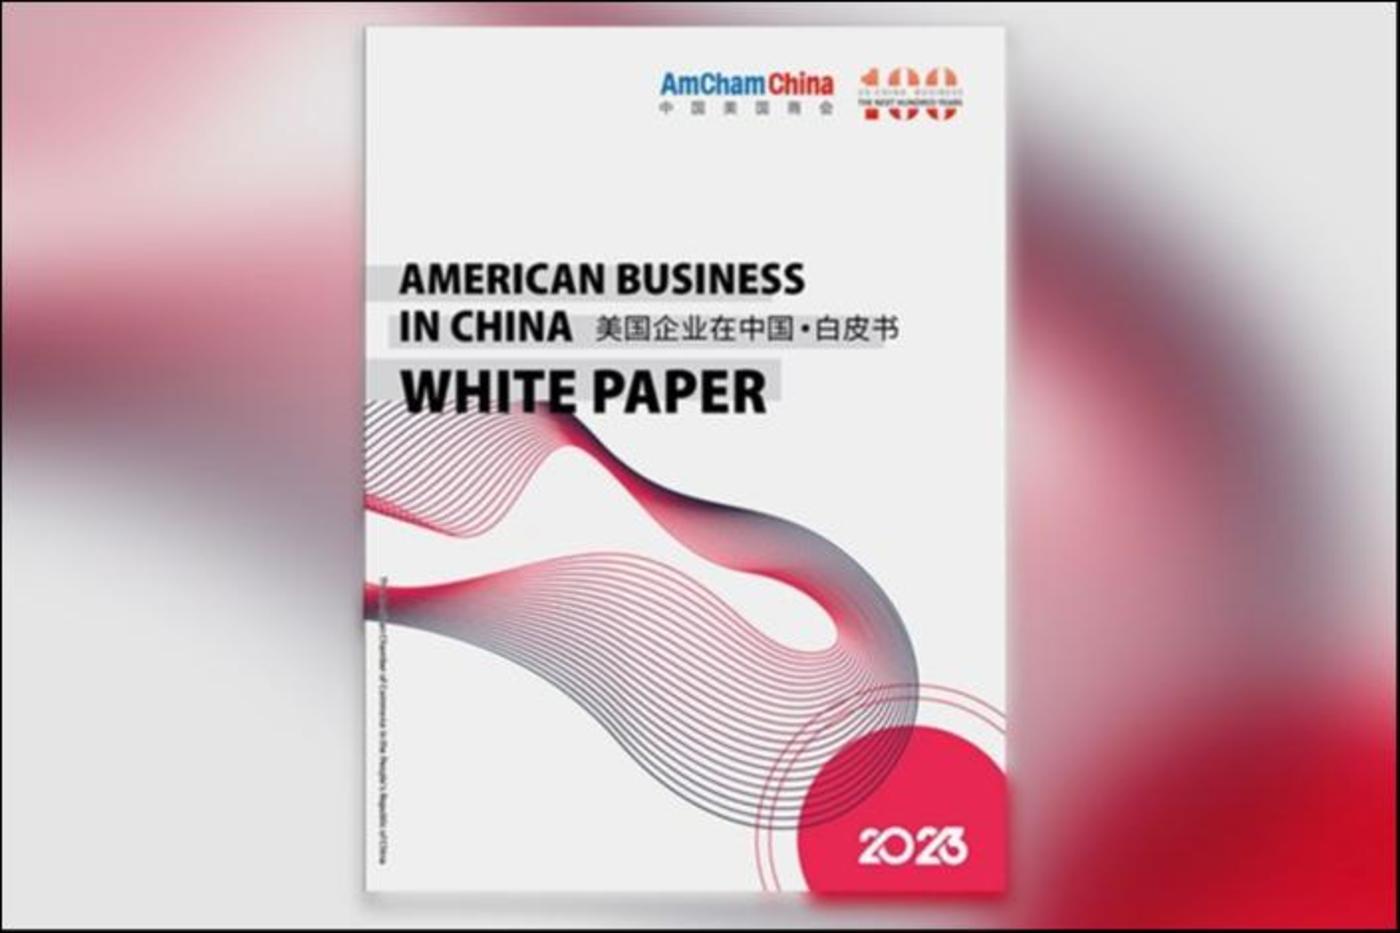 US Firms Getting Optimistic About Business Growth in China: AmCham China